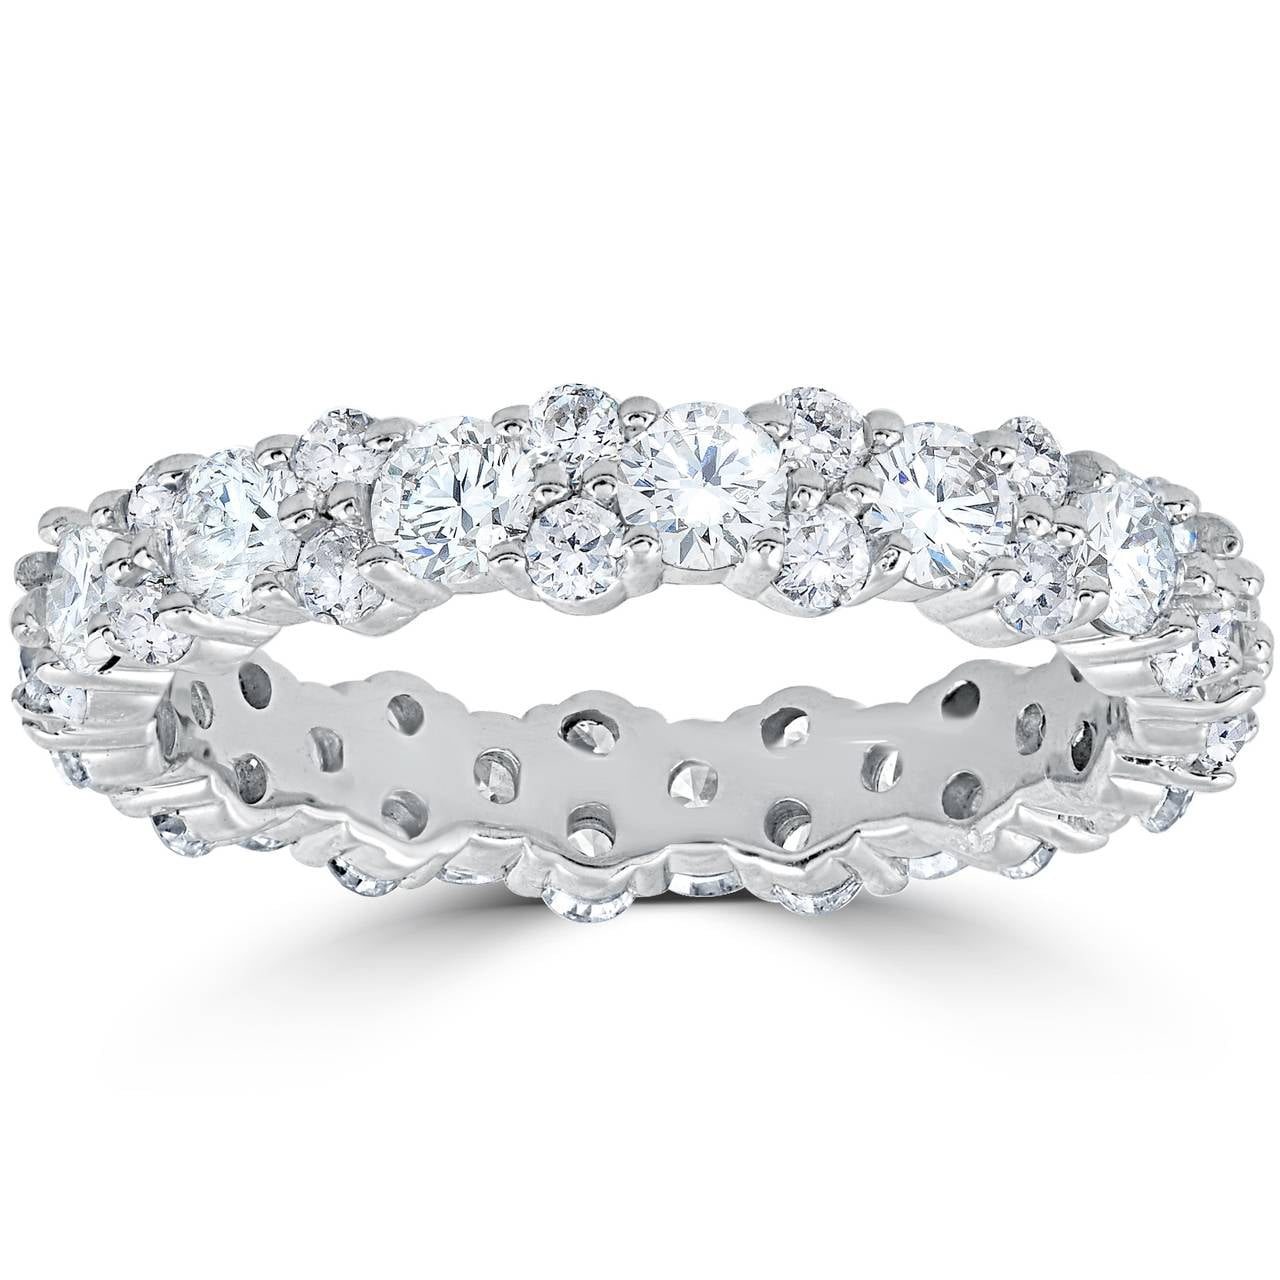 Details about   1.00 Ct Round Diamond Full Eternity Anniversary Band Ring 14K White Gold Finish 